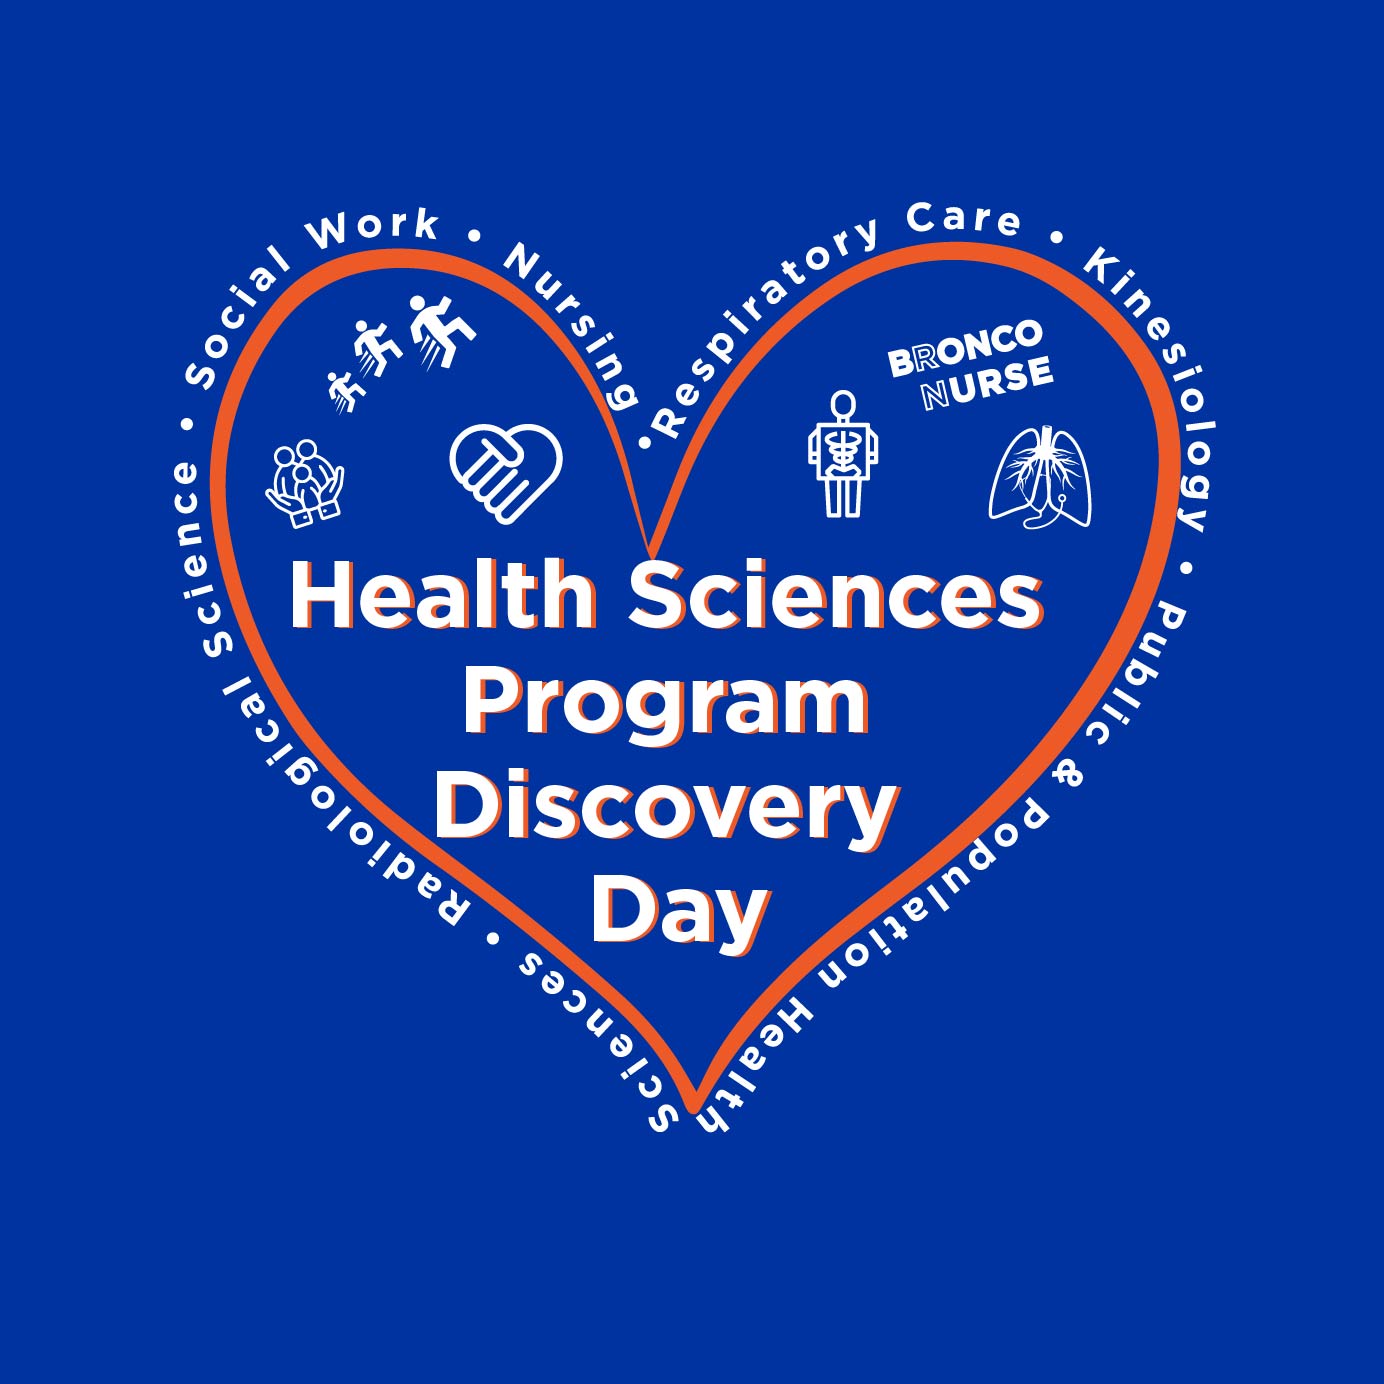 Orange heart on blue background with icons of stick figures running, hands clasped forming a heart, stick figures cupped in supportive hands, Bronco Nurse word art, lungs with a stethoscope, and a stick figure holding an x-ray of its torso. In the middle of the hear it reads Health Sciences Program Discovery Day and around the edge it says Respiratory Care, Kinesiology, Public and Population Health, Radiological Sciences, Social Work, Nursing